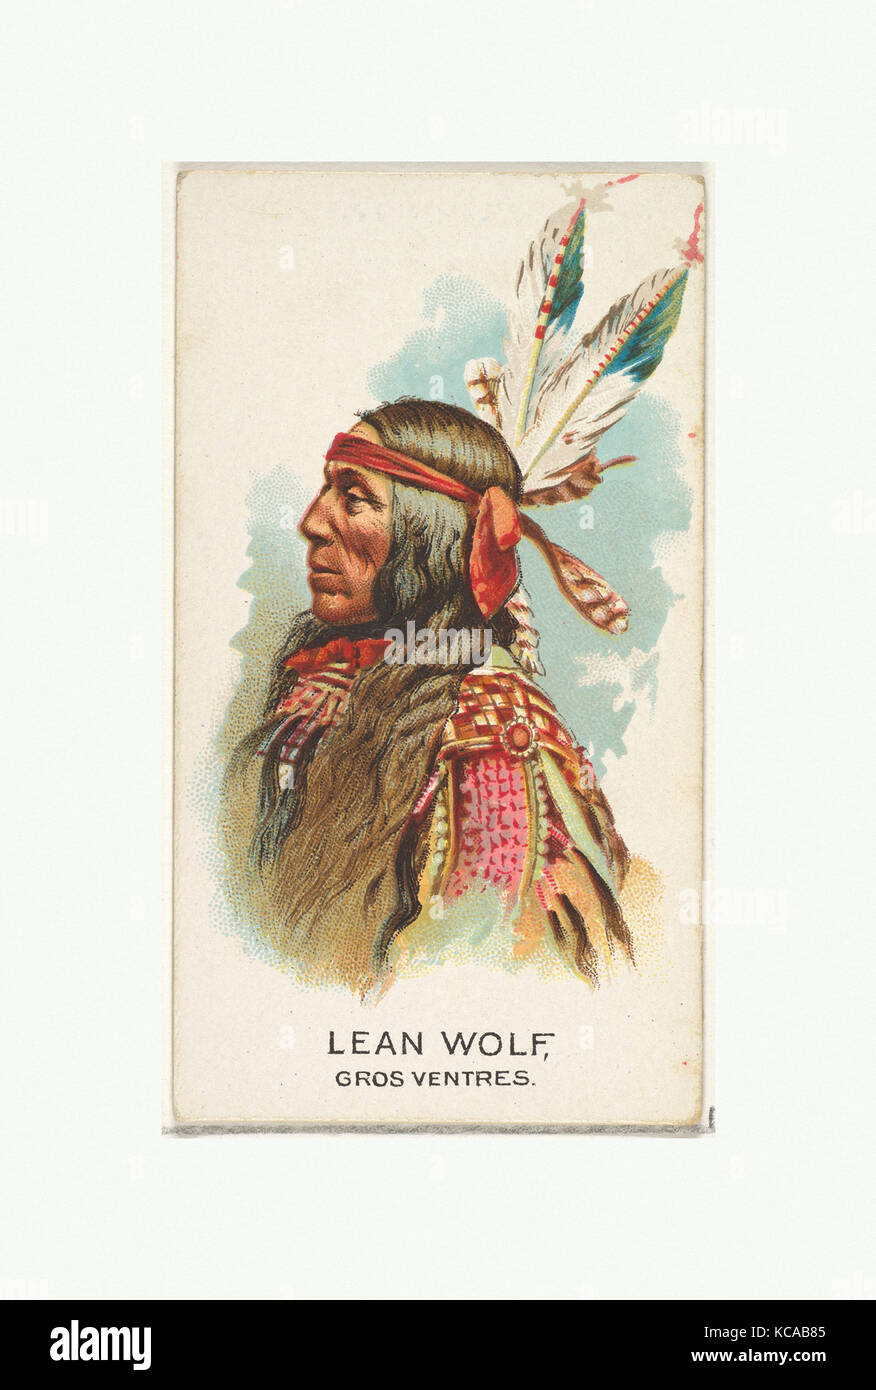 Lean Wolf, Gros Ventres, from the American Indian Chiefs series (N2) for Allen & Ginter Cigarettes Brands, 1888 Stock Photo